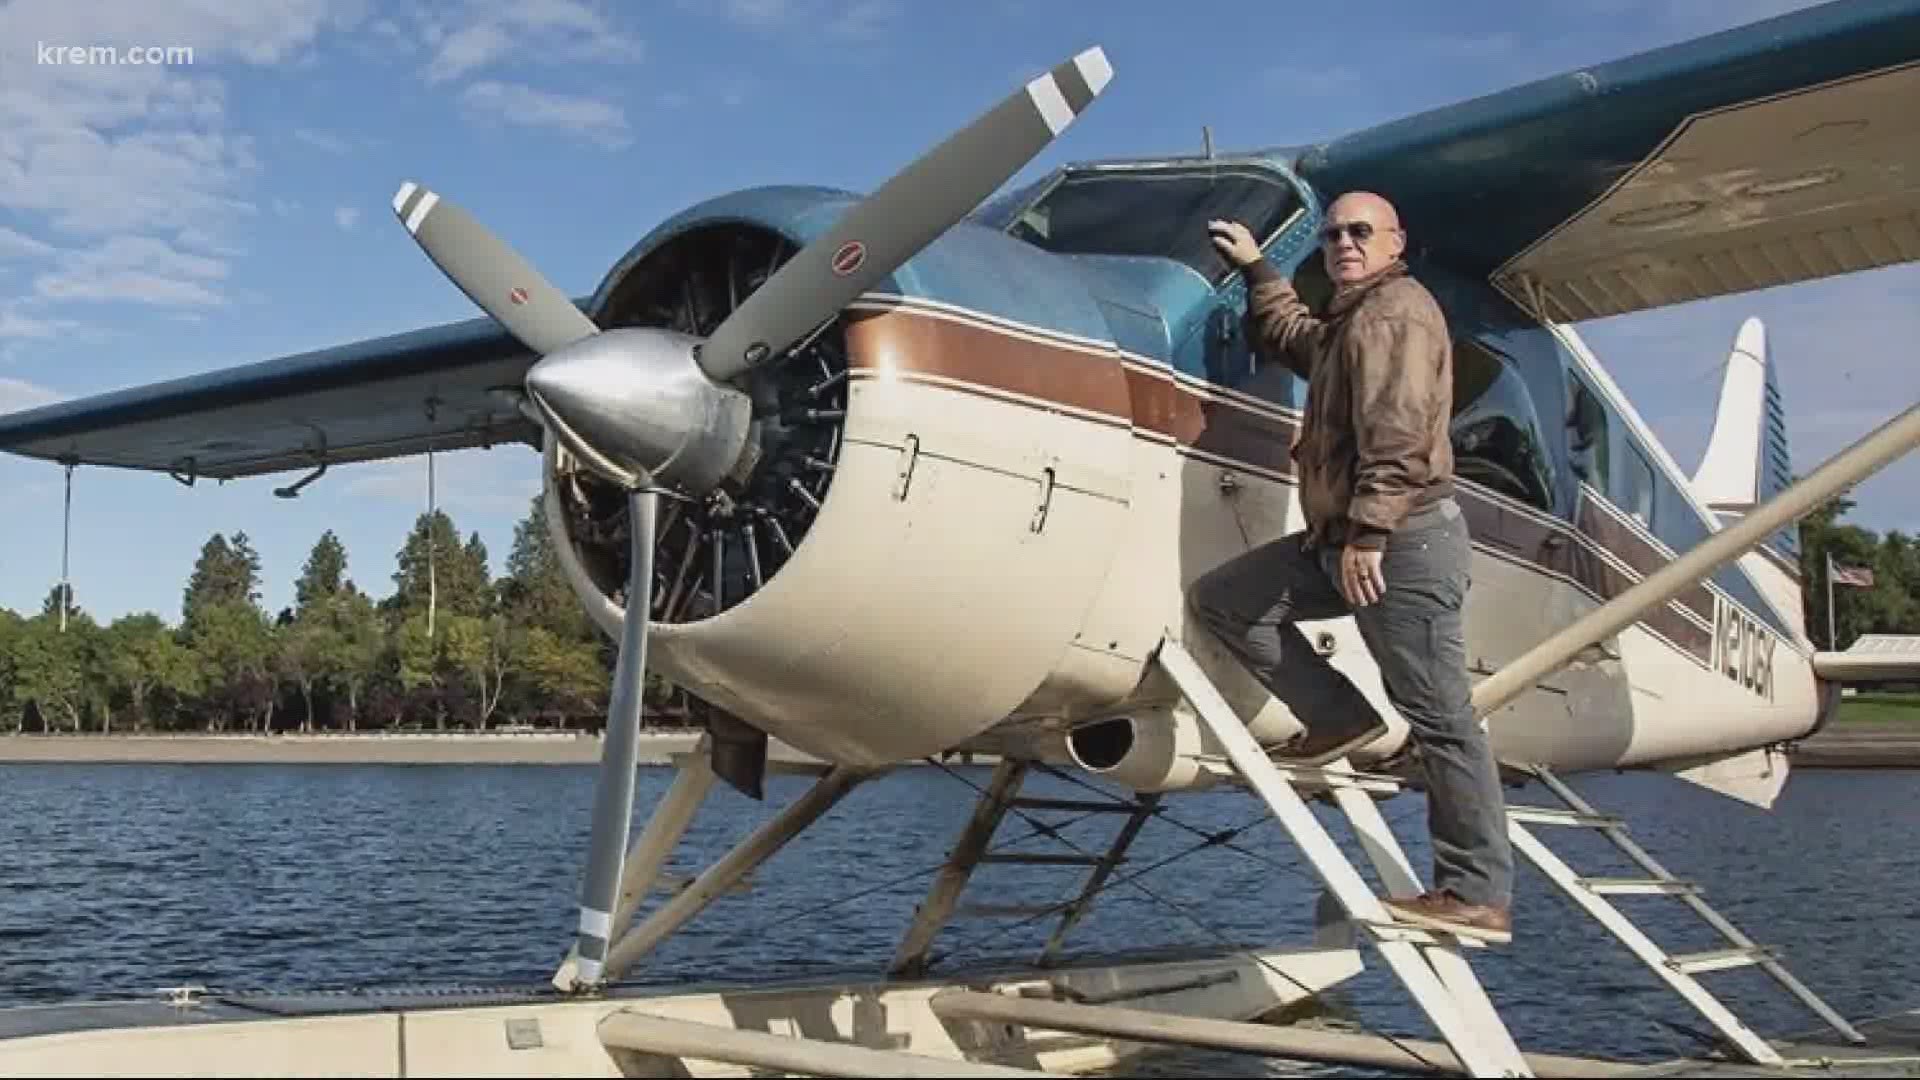 Brooks Seaplane's owner Neil Lunt was one of eight people killed in the July 5 mid-air collision over Lake Coeur d'Alene.